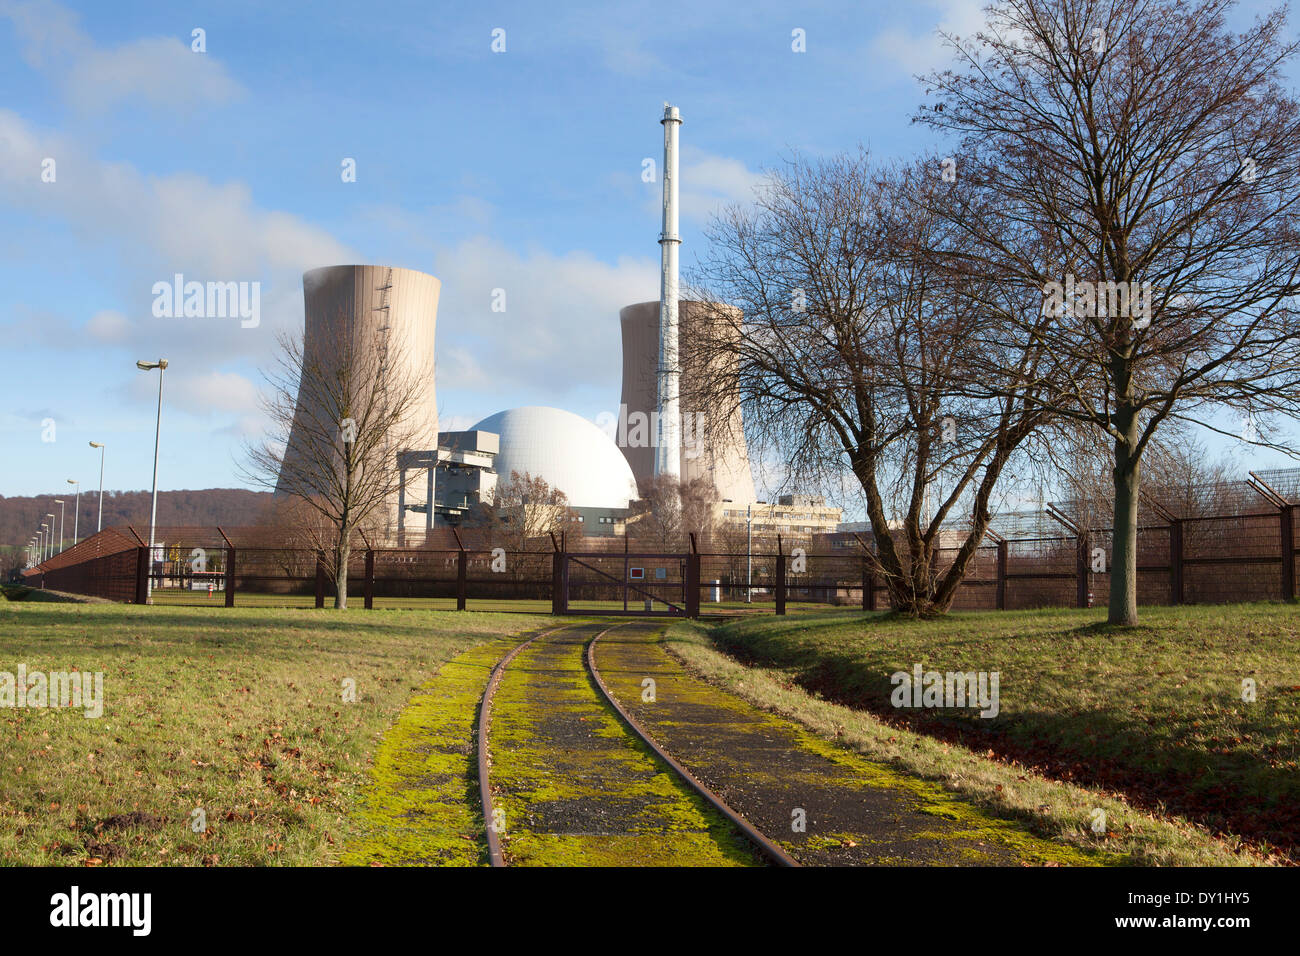 Grohnde Nuclear Power Plant, Emmerthal, Hameln, Lower Saxony, Germany, Europe Stock Photo